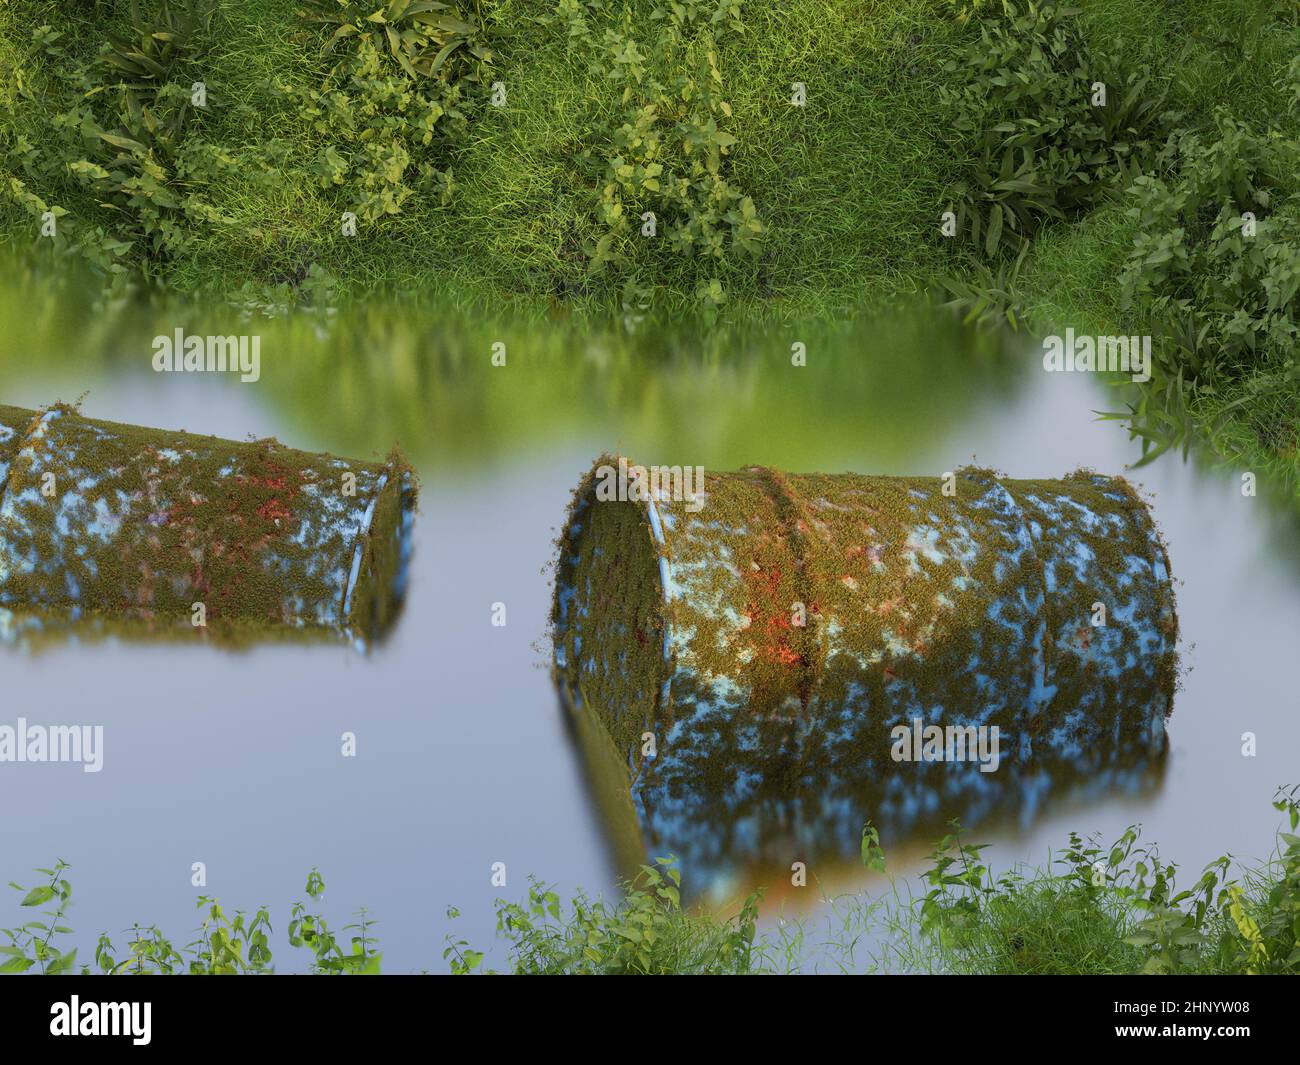 Two barrels of hazardous waste are rotting in the wild, conceptual 3d rendering Stock Photo